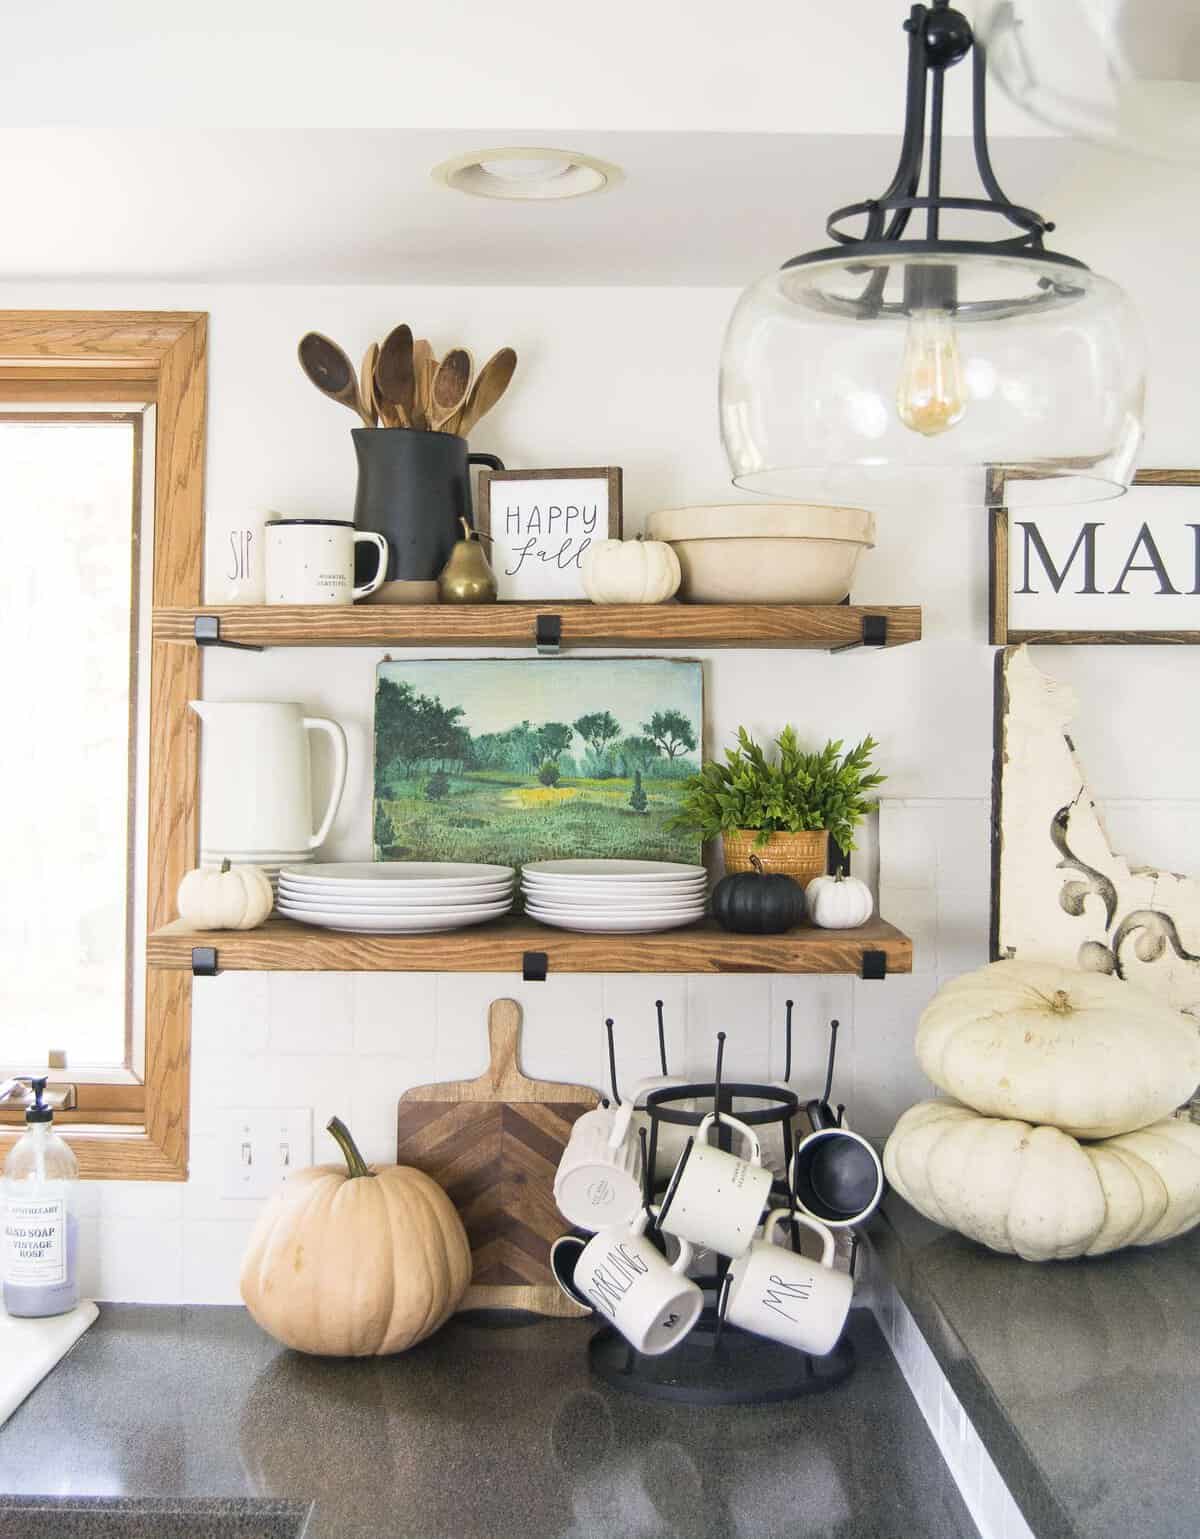 Dining in the Fall | Read more to see simple and affordable fall decor ideas for the kitchen and dining room! #falldecorideas #kitchendecor